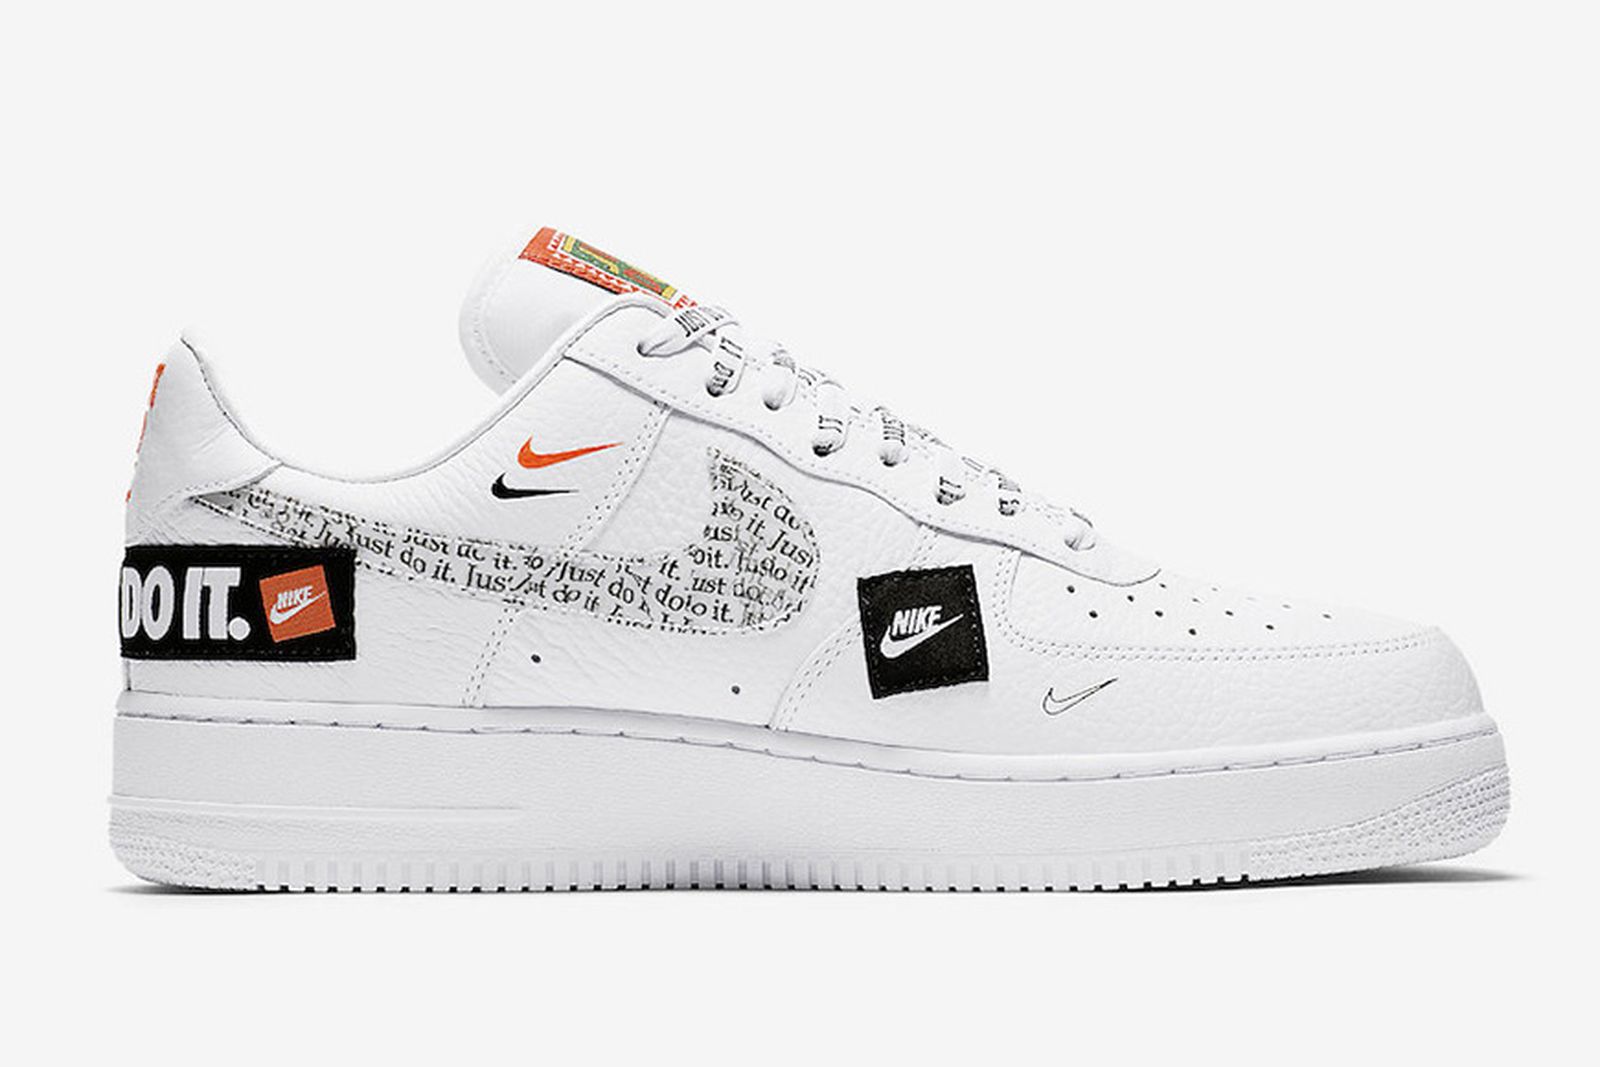 Nike nike air force 1 just do it Air Force 1 "Just Do It": Release Date, Price, & More Info